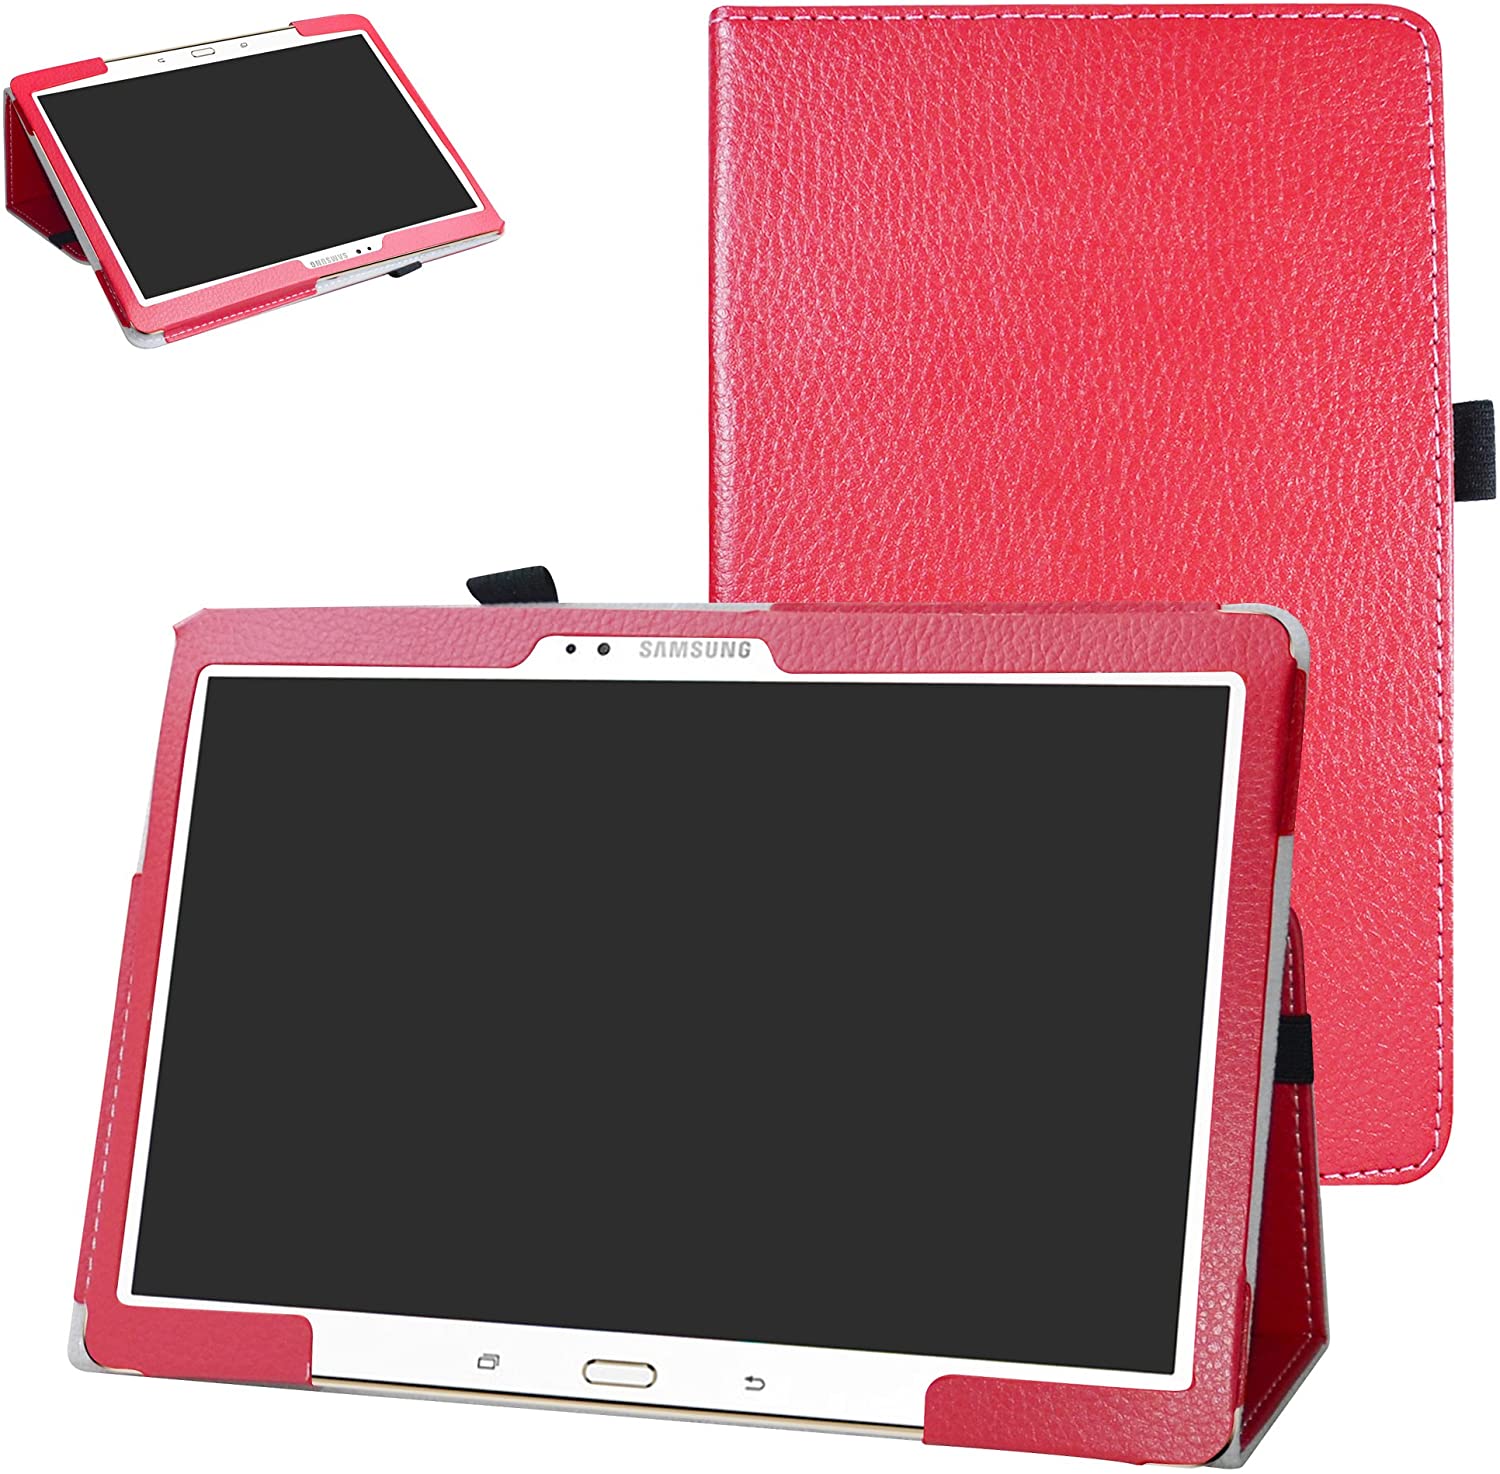 Samsung Tab S 10.5 T800 Case,Mama Mouth PU Leather Folio 2-Folding Stand Cover for 10.5" - RED - e4cents